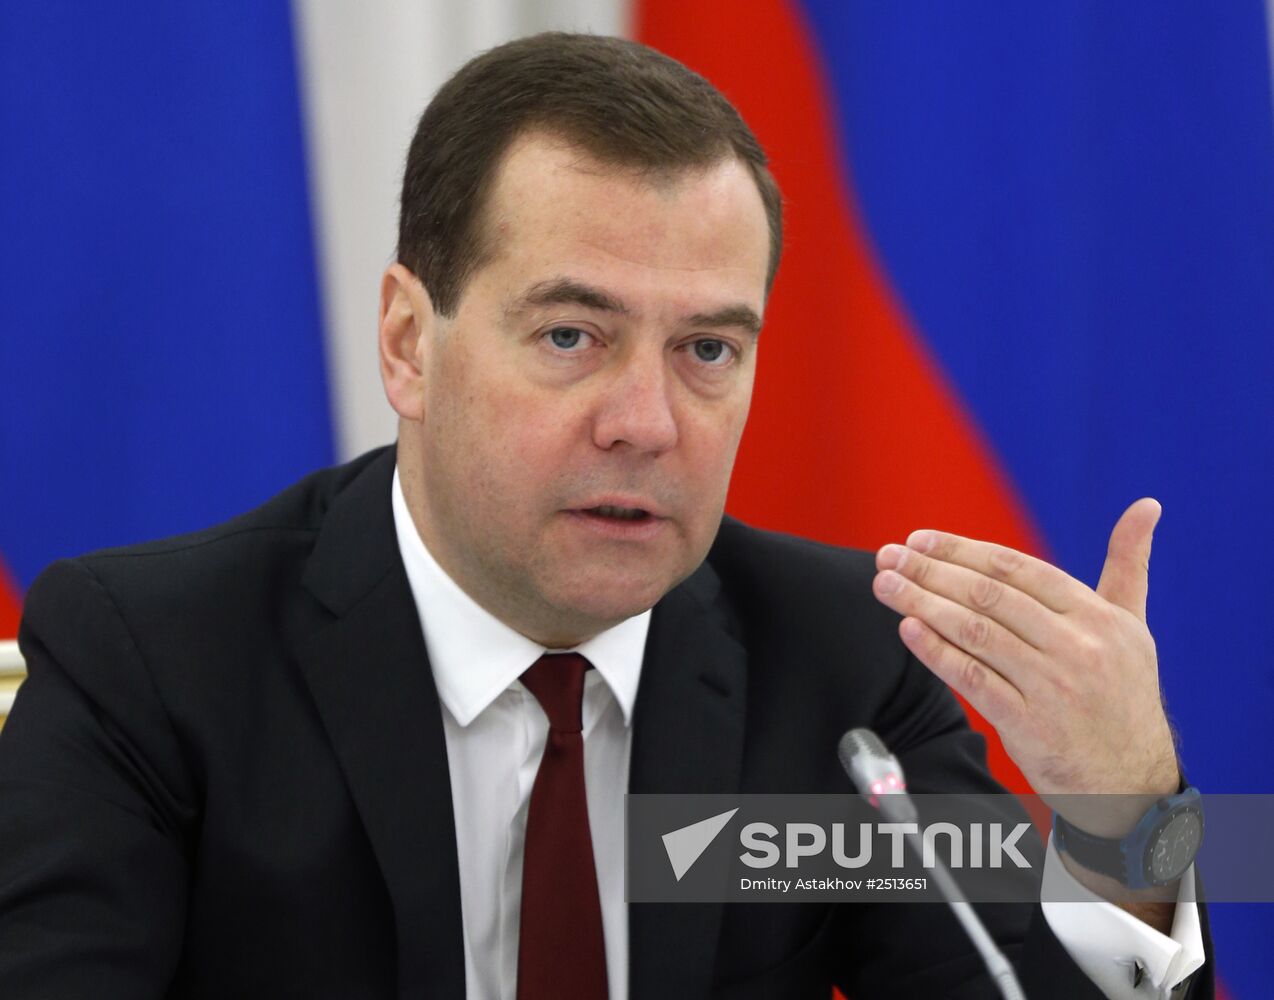 Dmitry Medvedev conducts meeting of the Foreign Investment Advisory Council